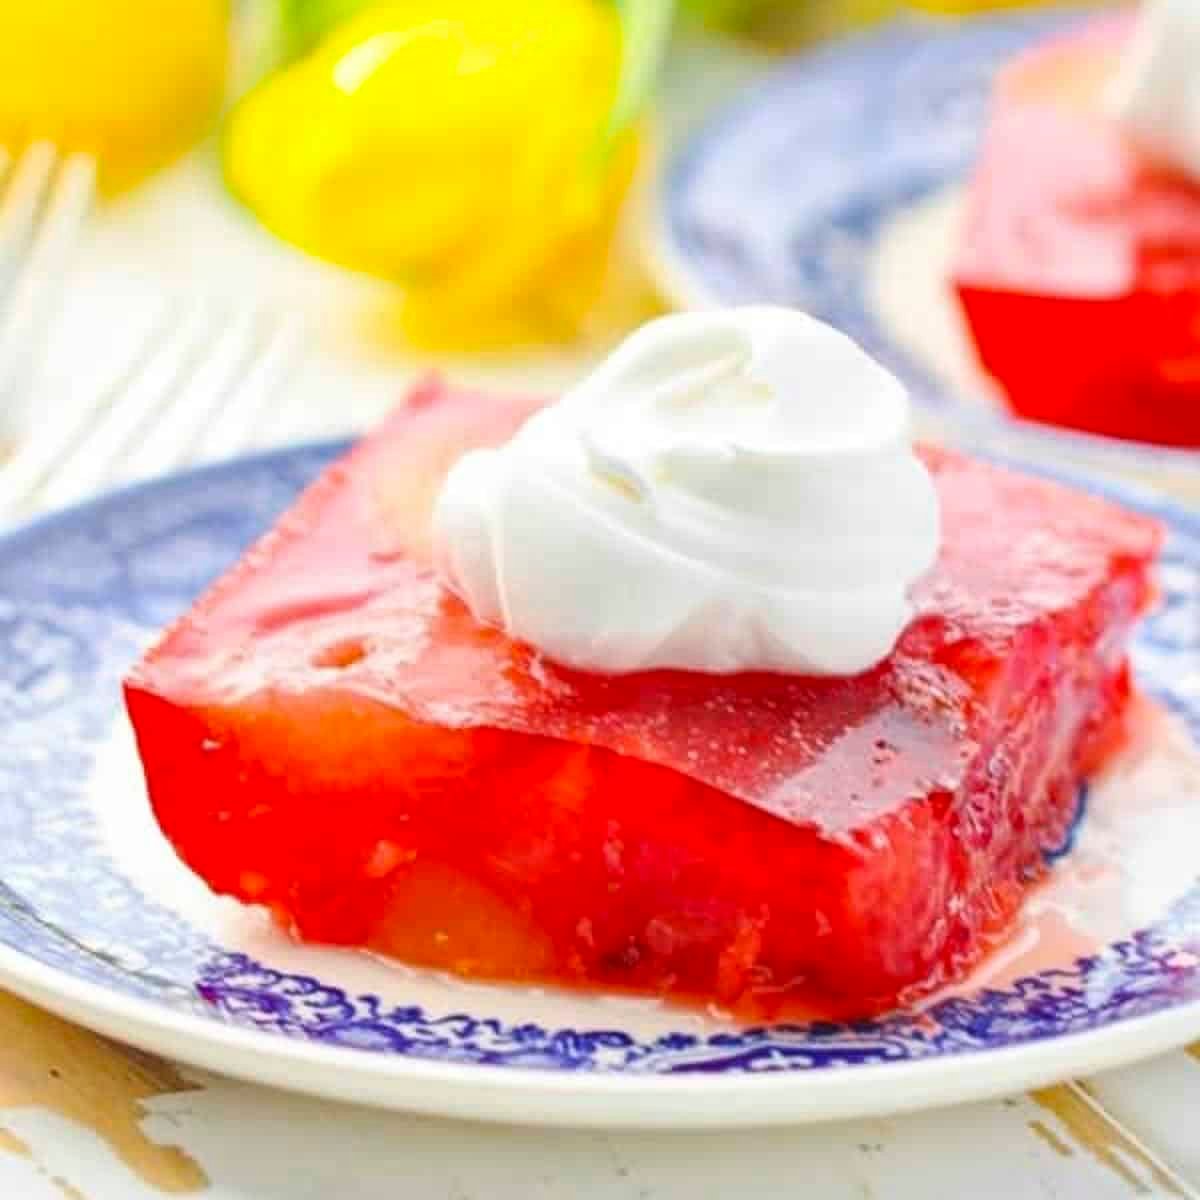 Square side shot of a slice of strawberry jello salad on a blue and white plate.